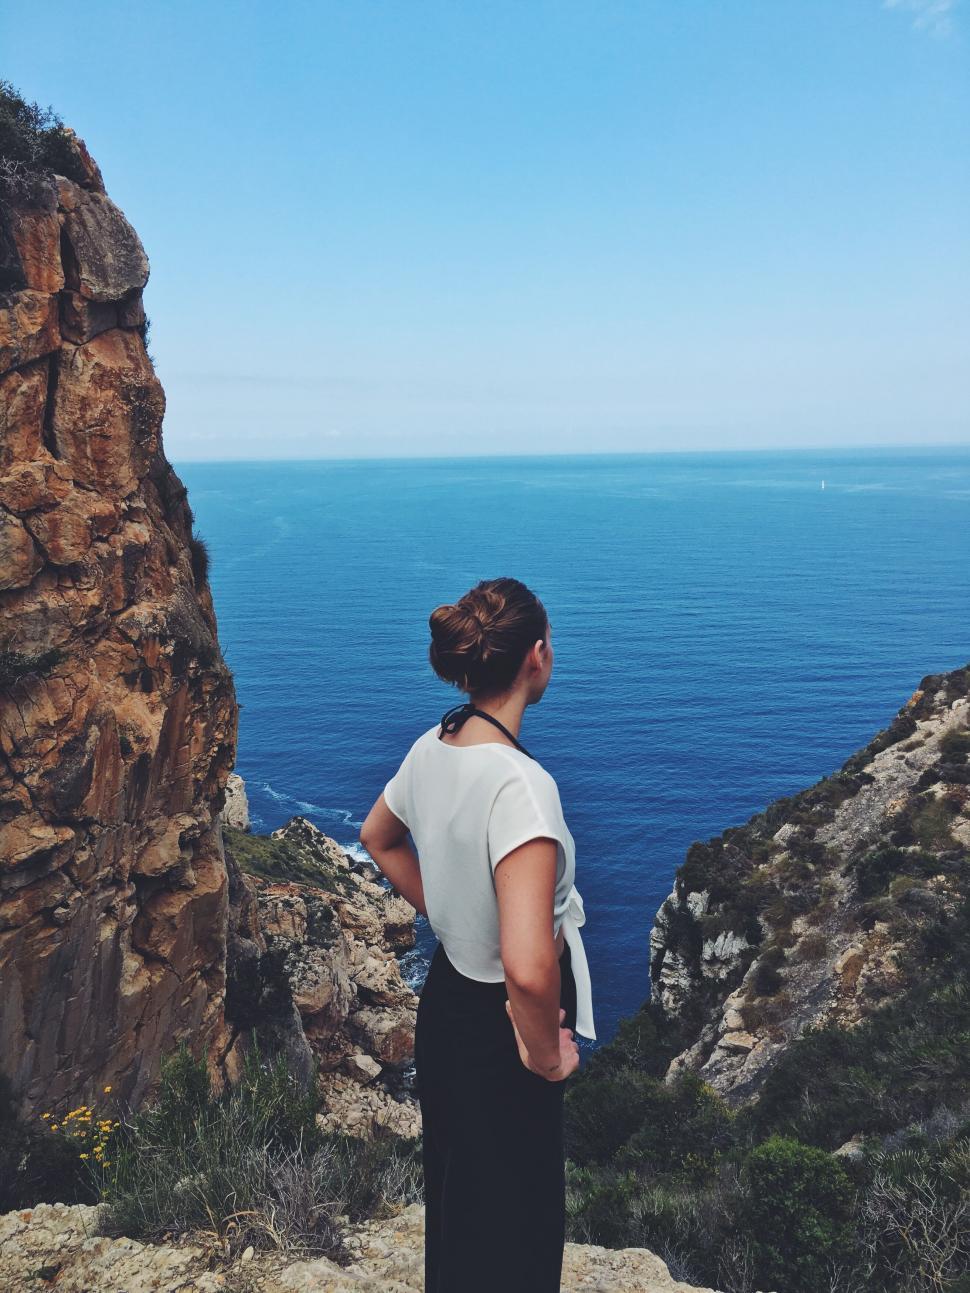 Free Image of Woman standing on cliff overlooking the sea 